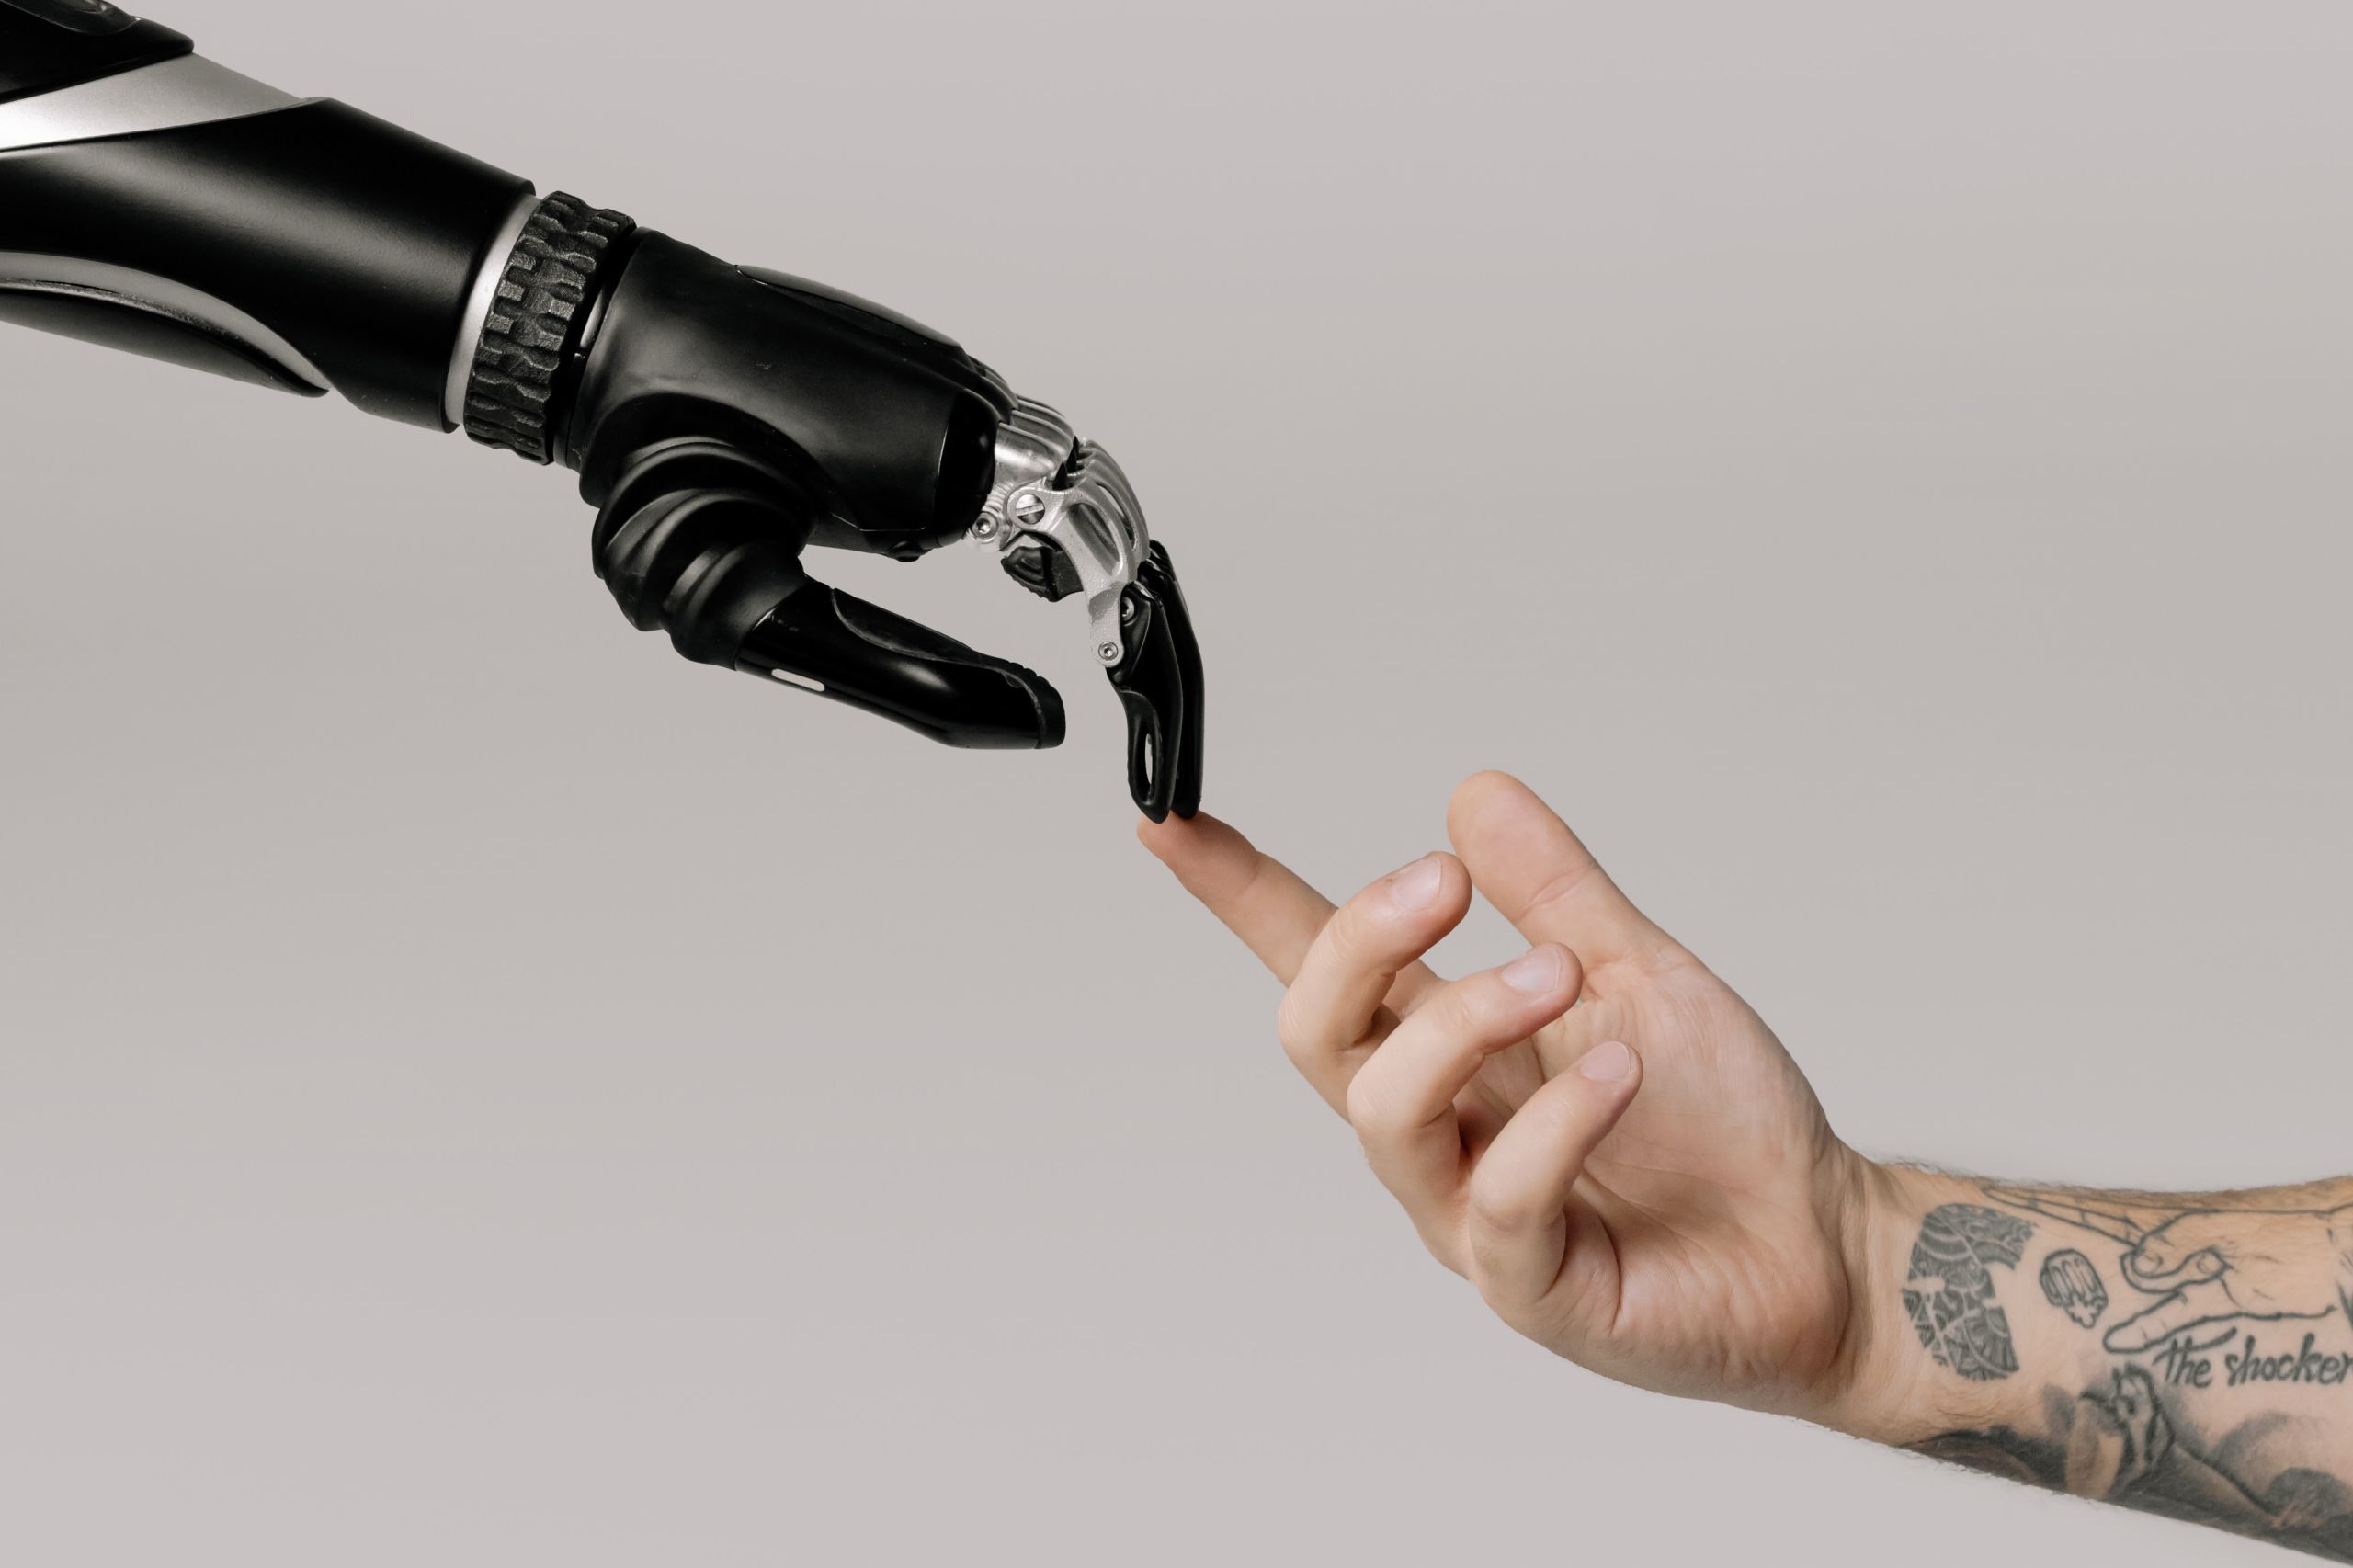 Photo of robot arm and human arm touching downloaded from pexels. The photo is by cottonbro studio